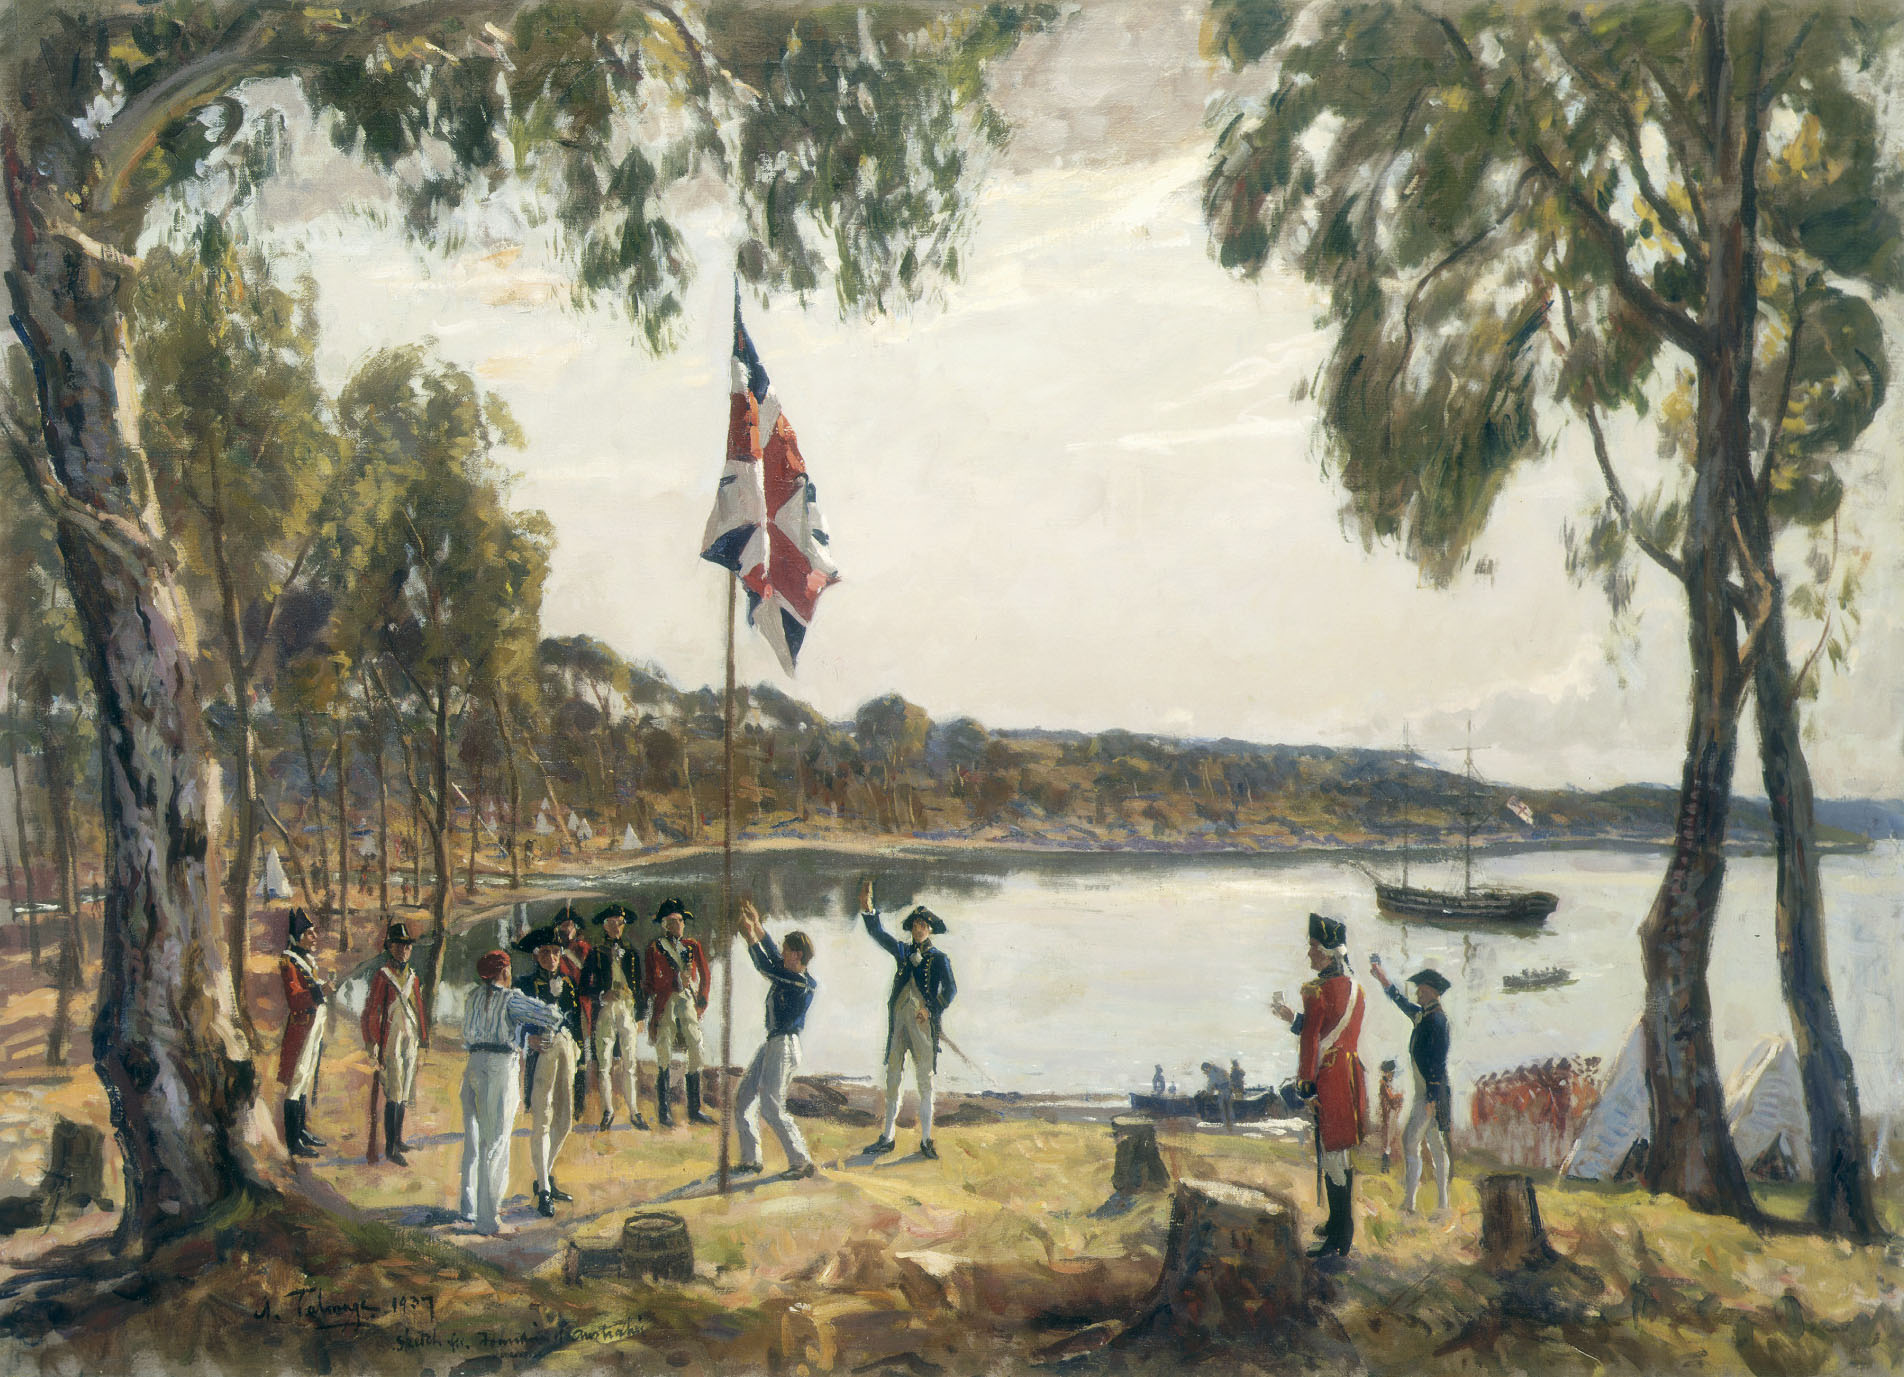 Australia Day 2017: What to Know About the Holiday's History | Time